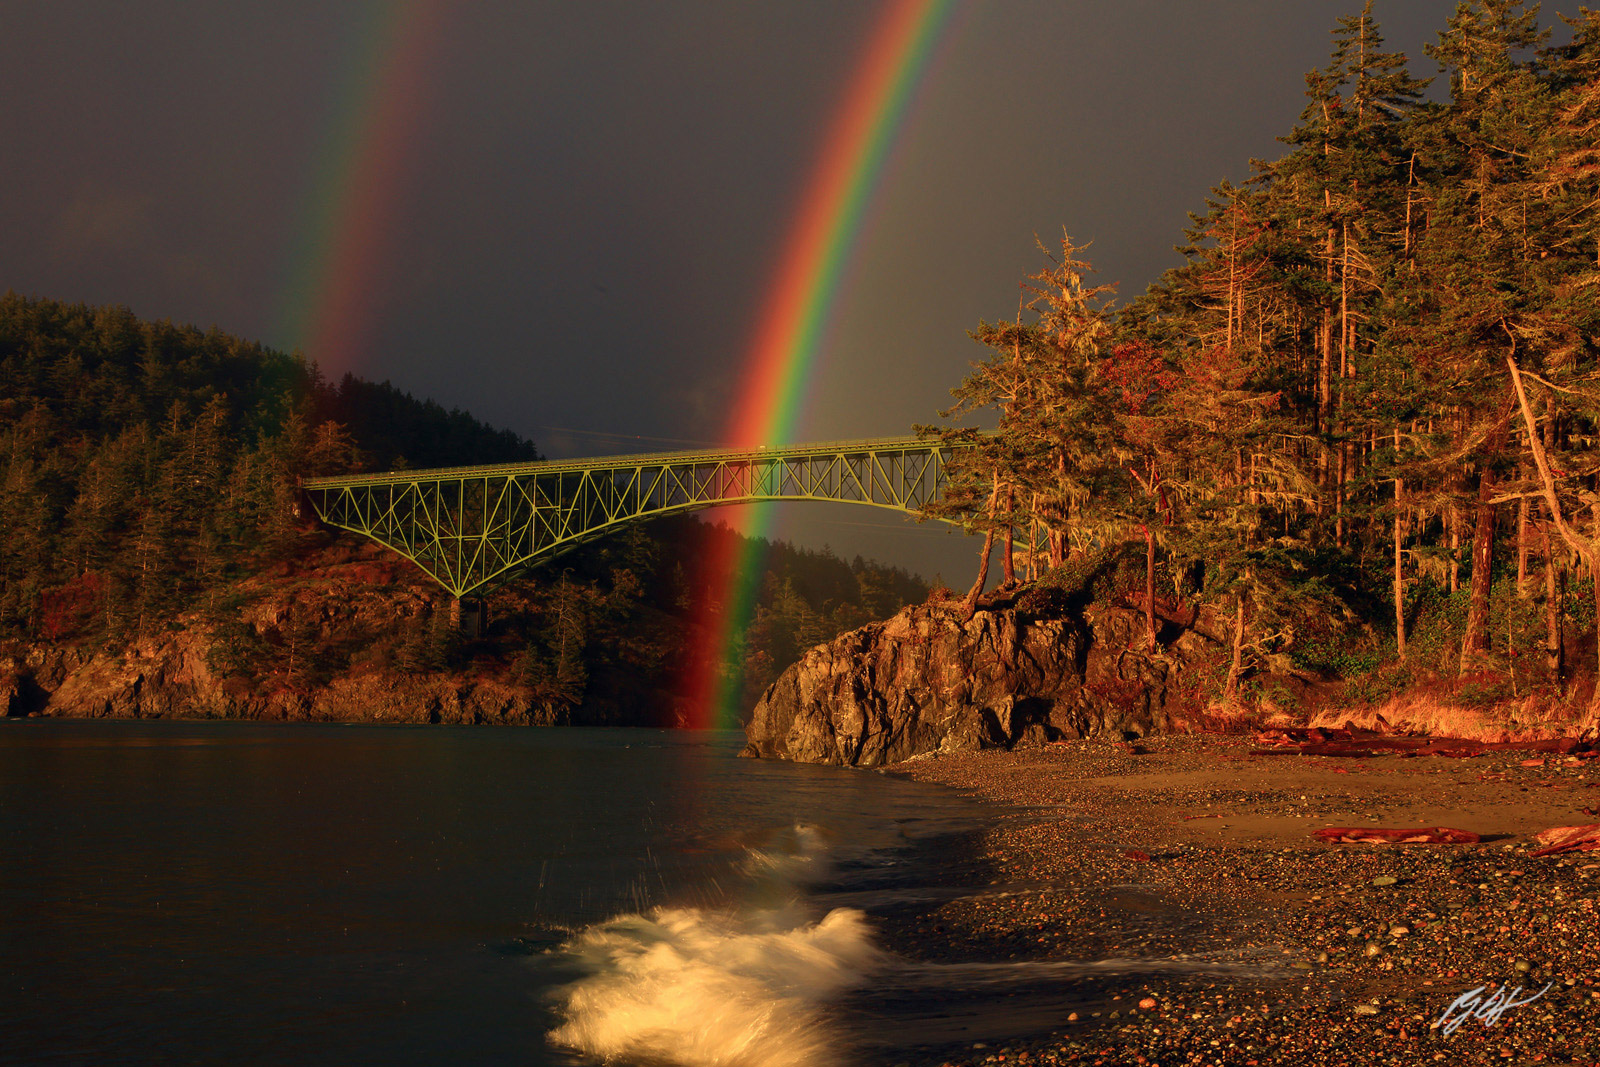 Double Rainbow Drop in the Deception Pass Bridge During a Rainstorm from Deception Pass State Park in Washington